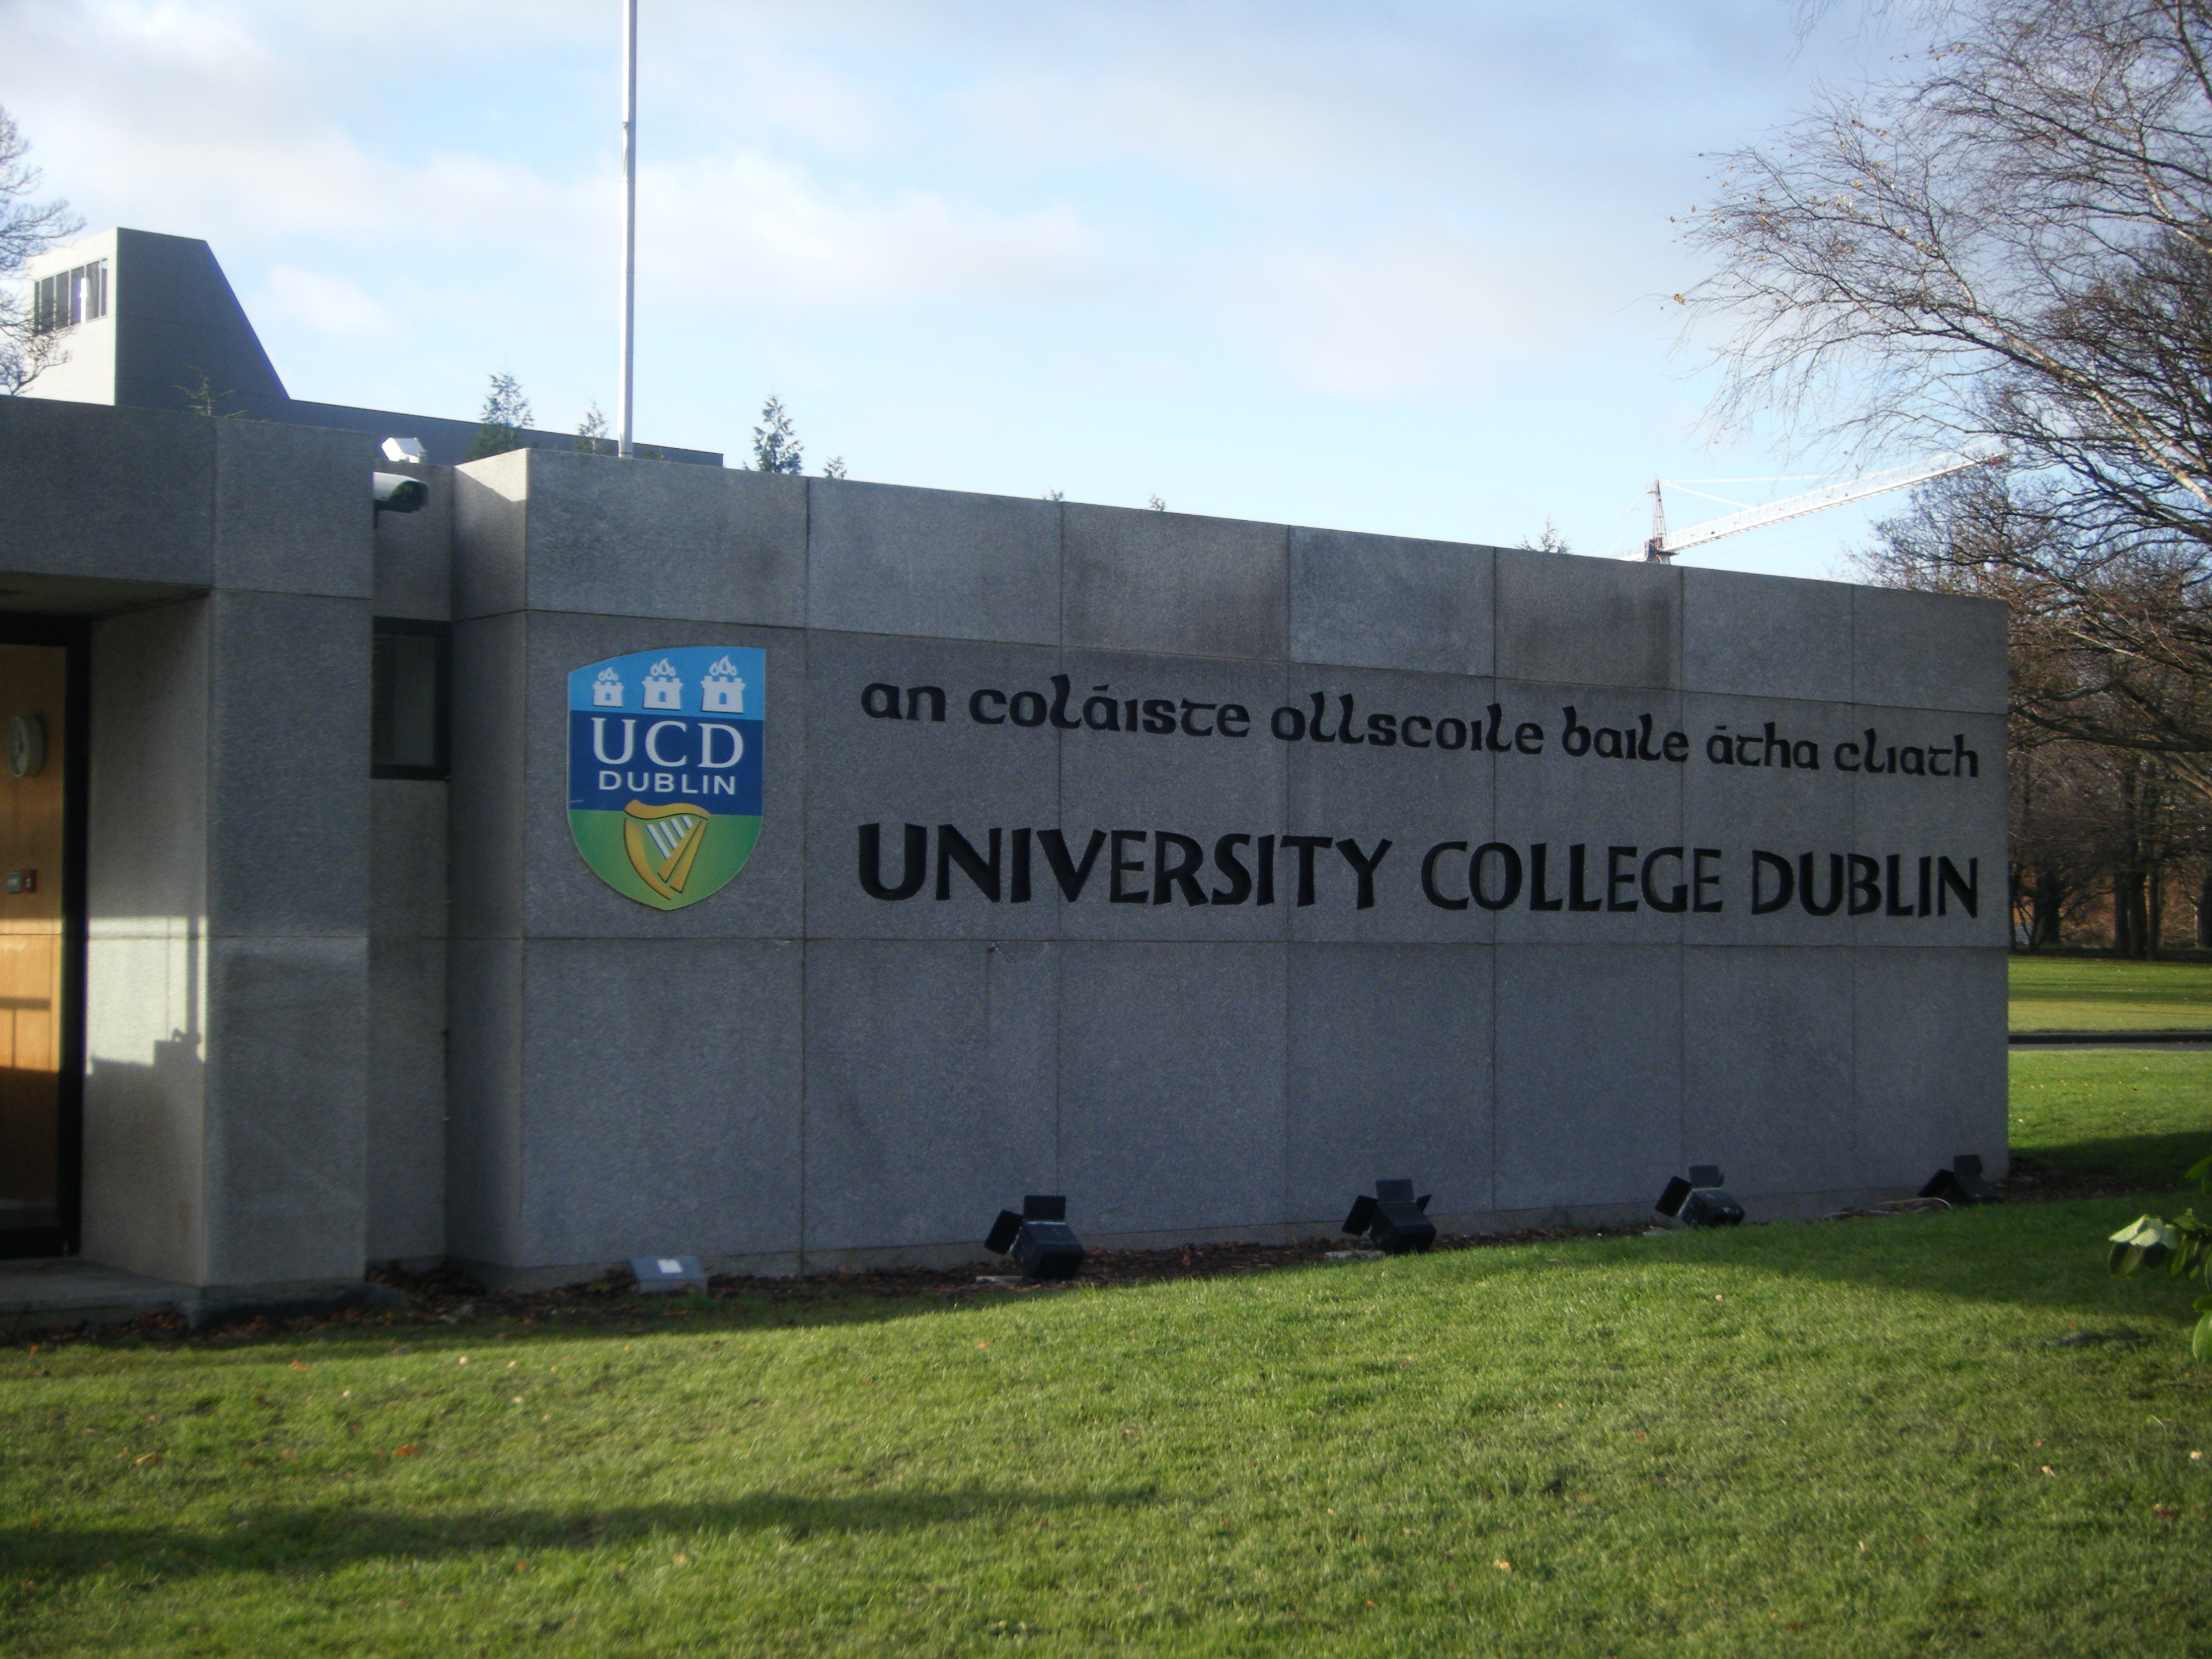 Ireland Dublin College University Fully Funded MA Scholarships in Theology, Philosophy, Music 2018